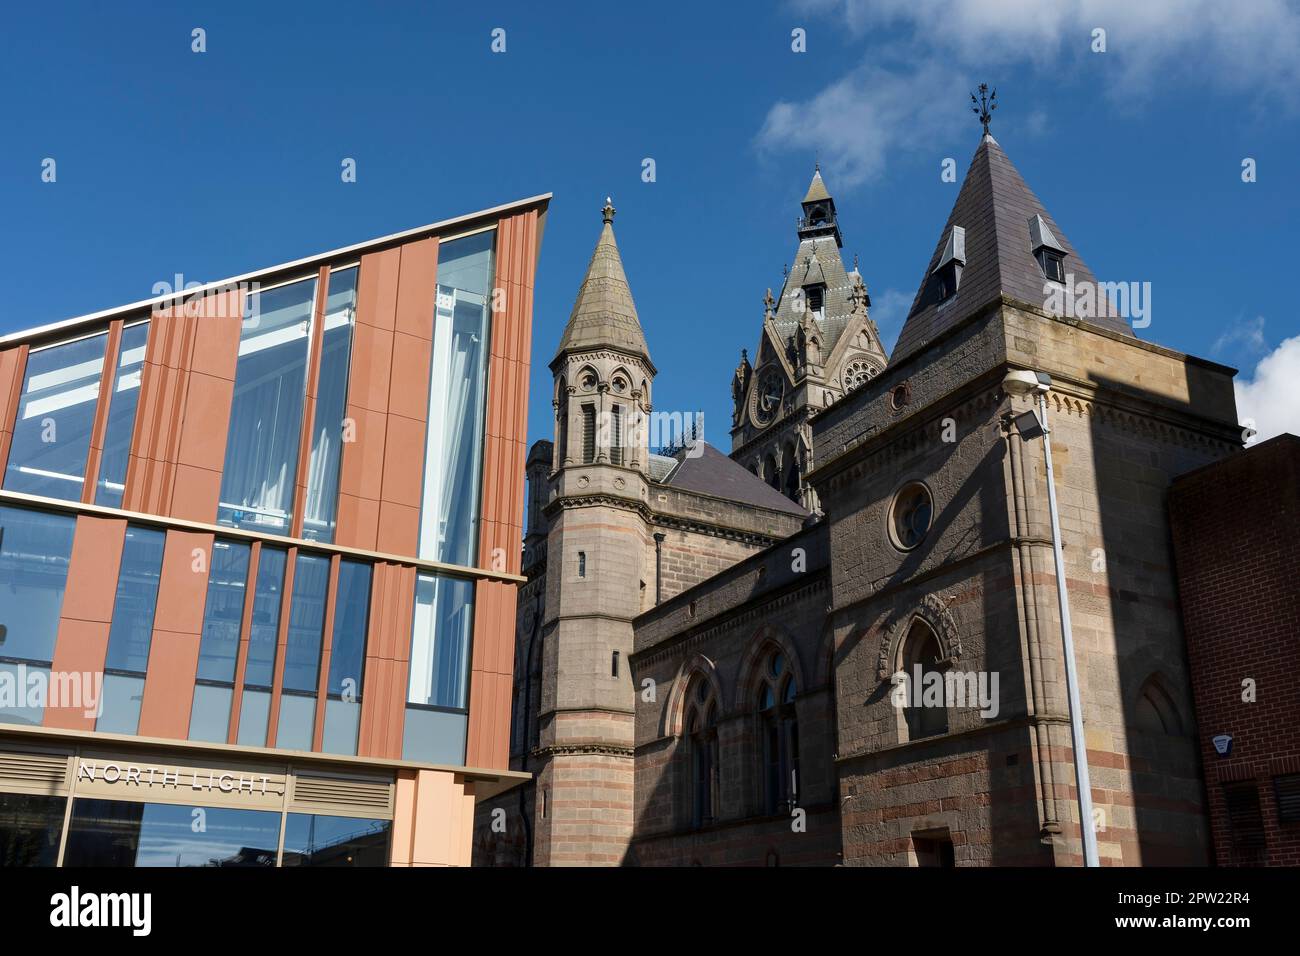 A juxtaposition of architectural styles in Chester city centre UK Stock Photo